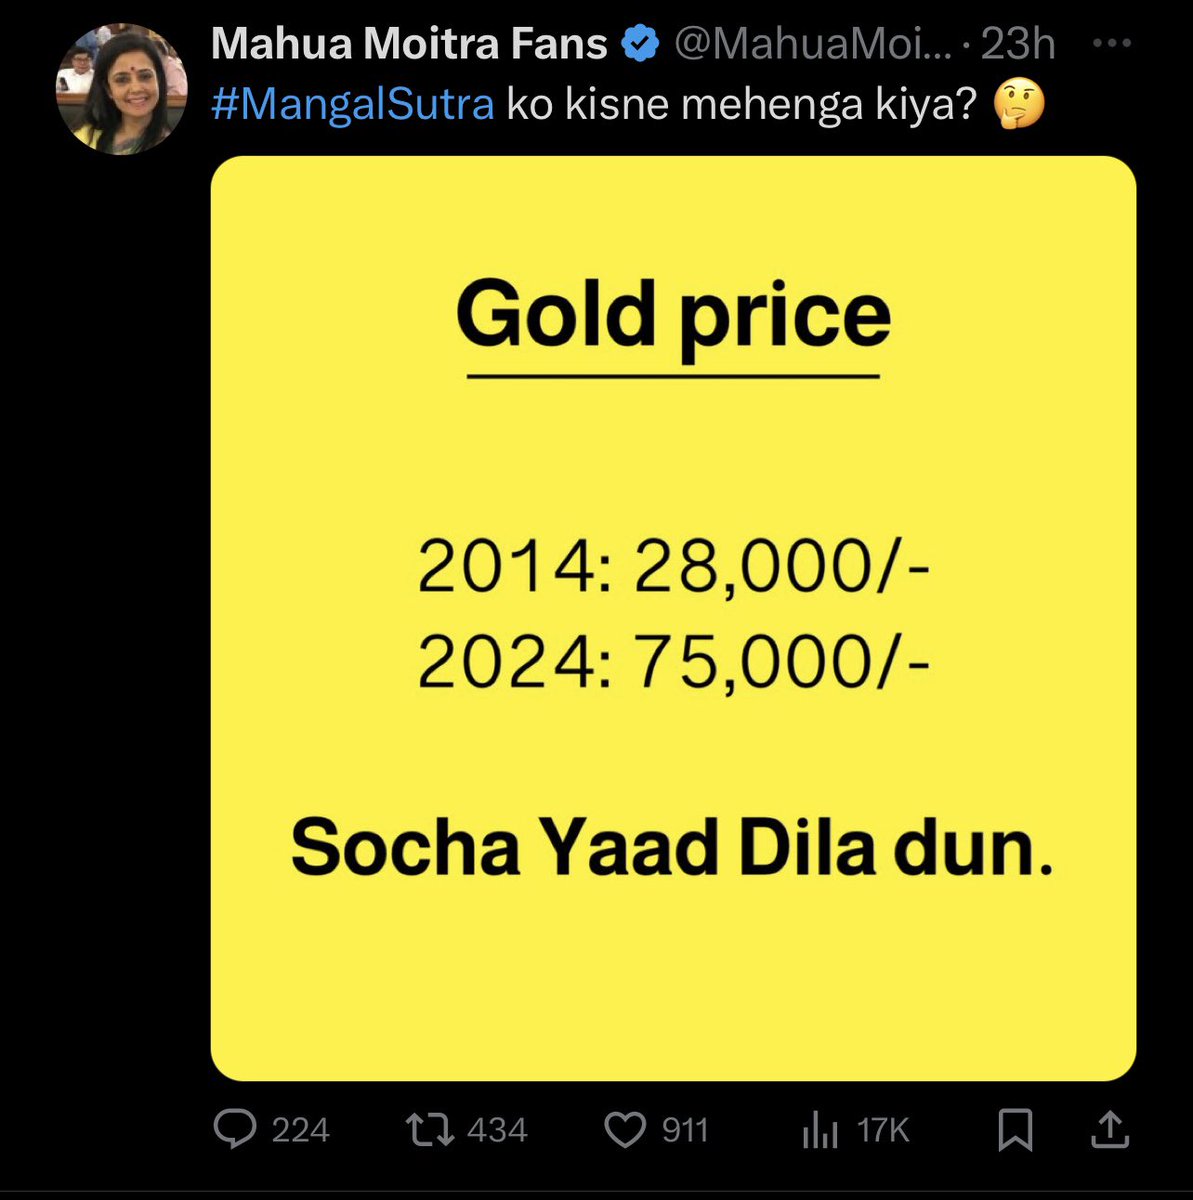 Yes yes  @MahuaMoitra  madam ….gold price is decided by government of India under Modi 😂😂😂😂so  don’t vote for Modi …
Now we understand why JPMorgan went out of business 😂😂😂😂.
The intelligent part is  911 people liked this tweet 🤦🤦🤦🤦
#DotAlliance
#DumbDotAlliance